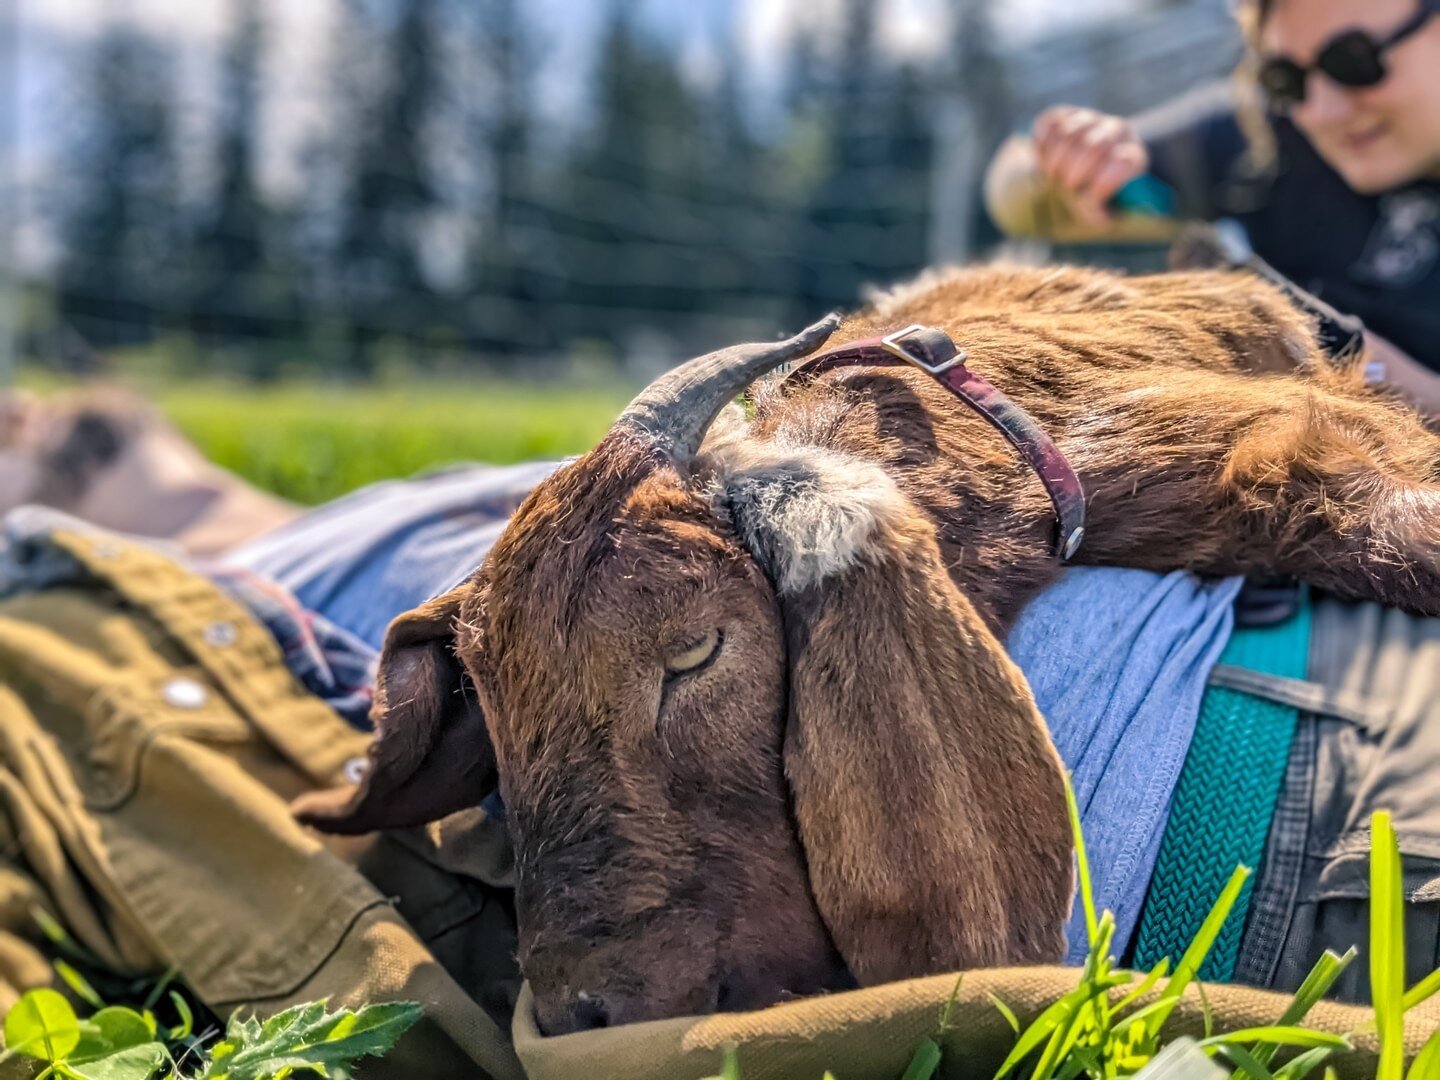 Some goats need to be restrained when they are getting their hooves trimmed, Peter just needs someone to cuddle with. Who do you think is working harder, me or Sarah?⁠
⁠
⁠
#farmsanctuary #animalsanctuary #rescue #friendsnotfood #herewithusnotforus #g